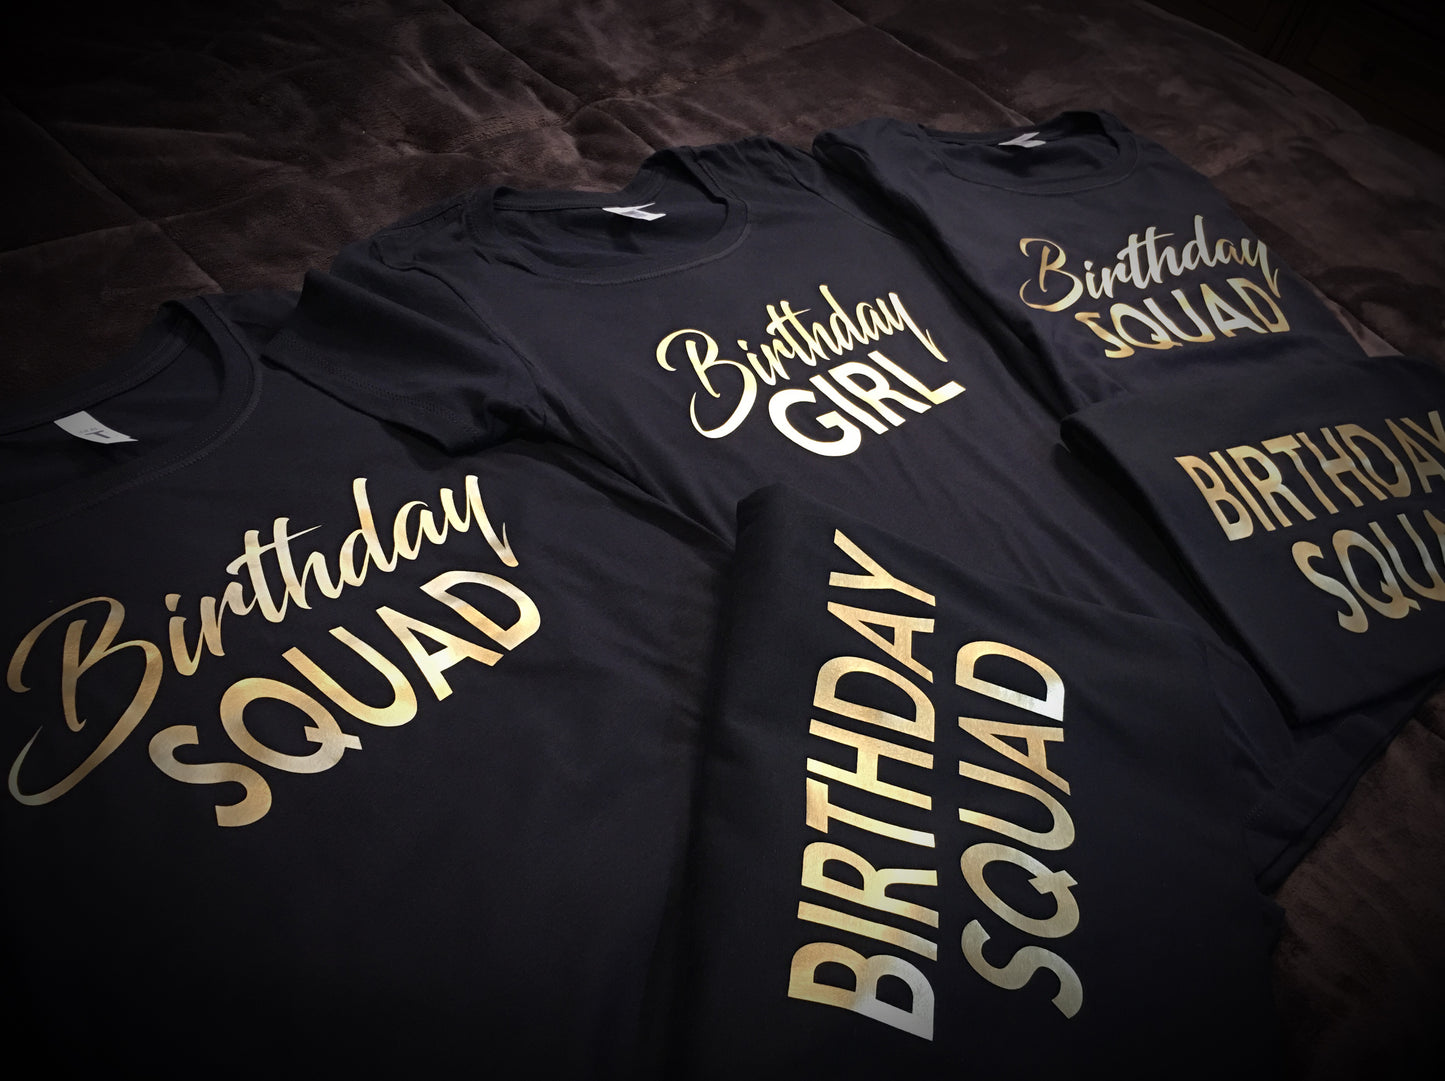 Birthday Girl and Squad T-Shirt